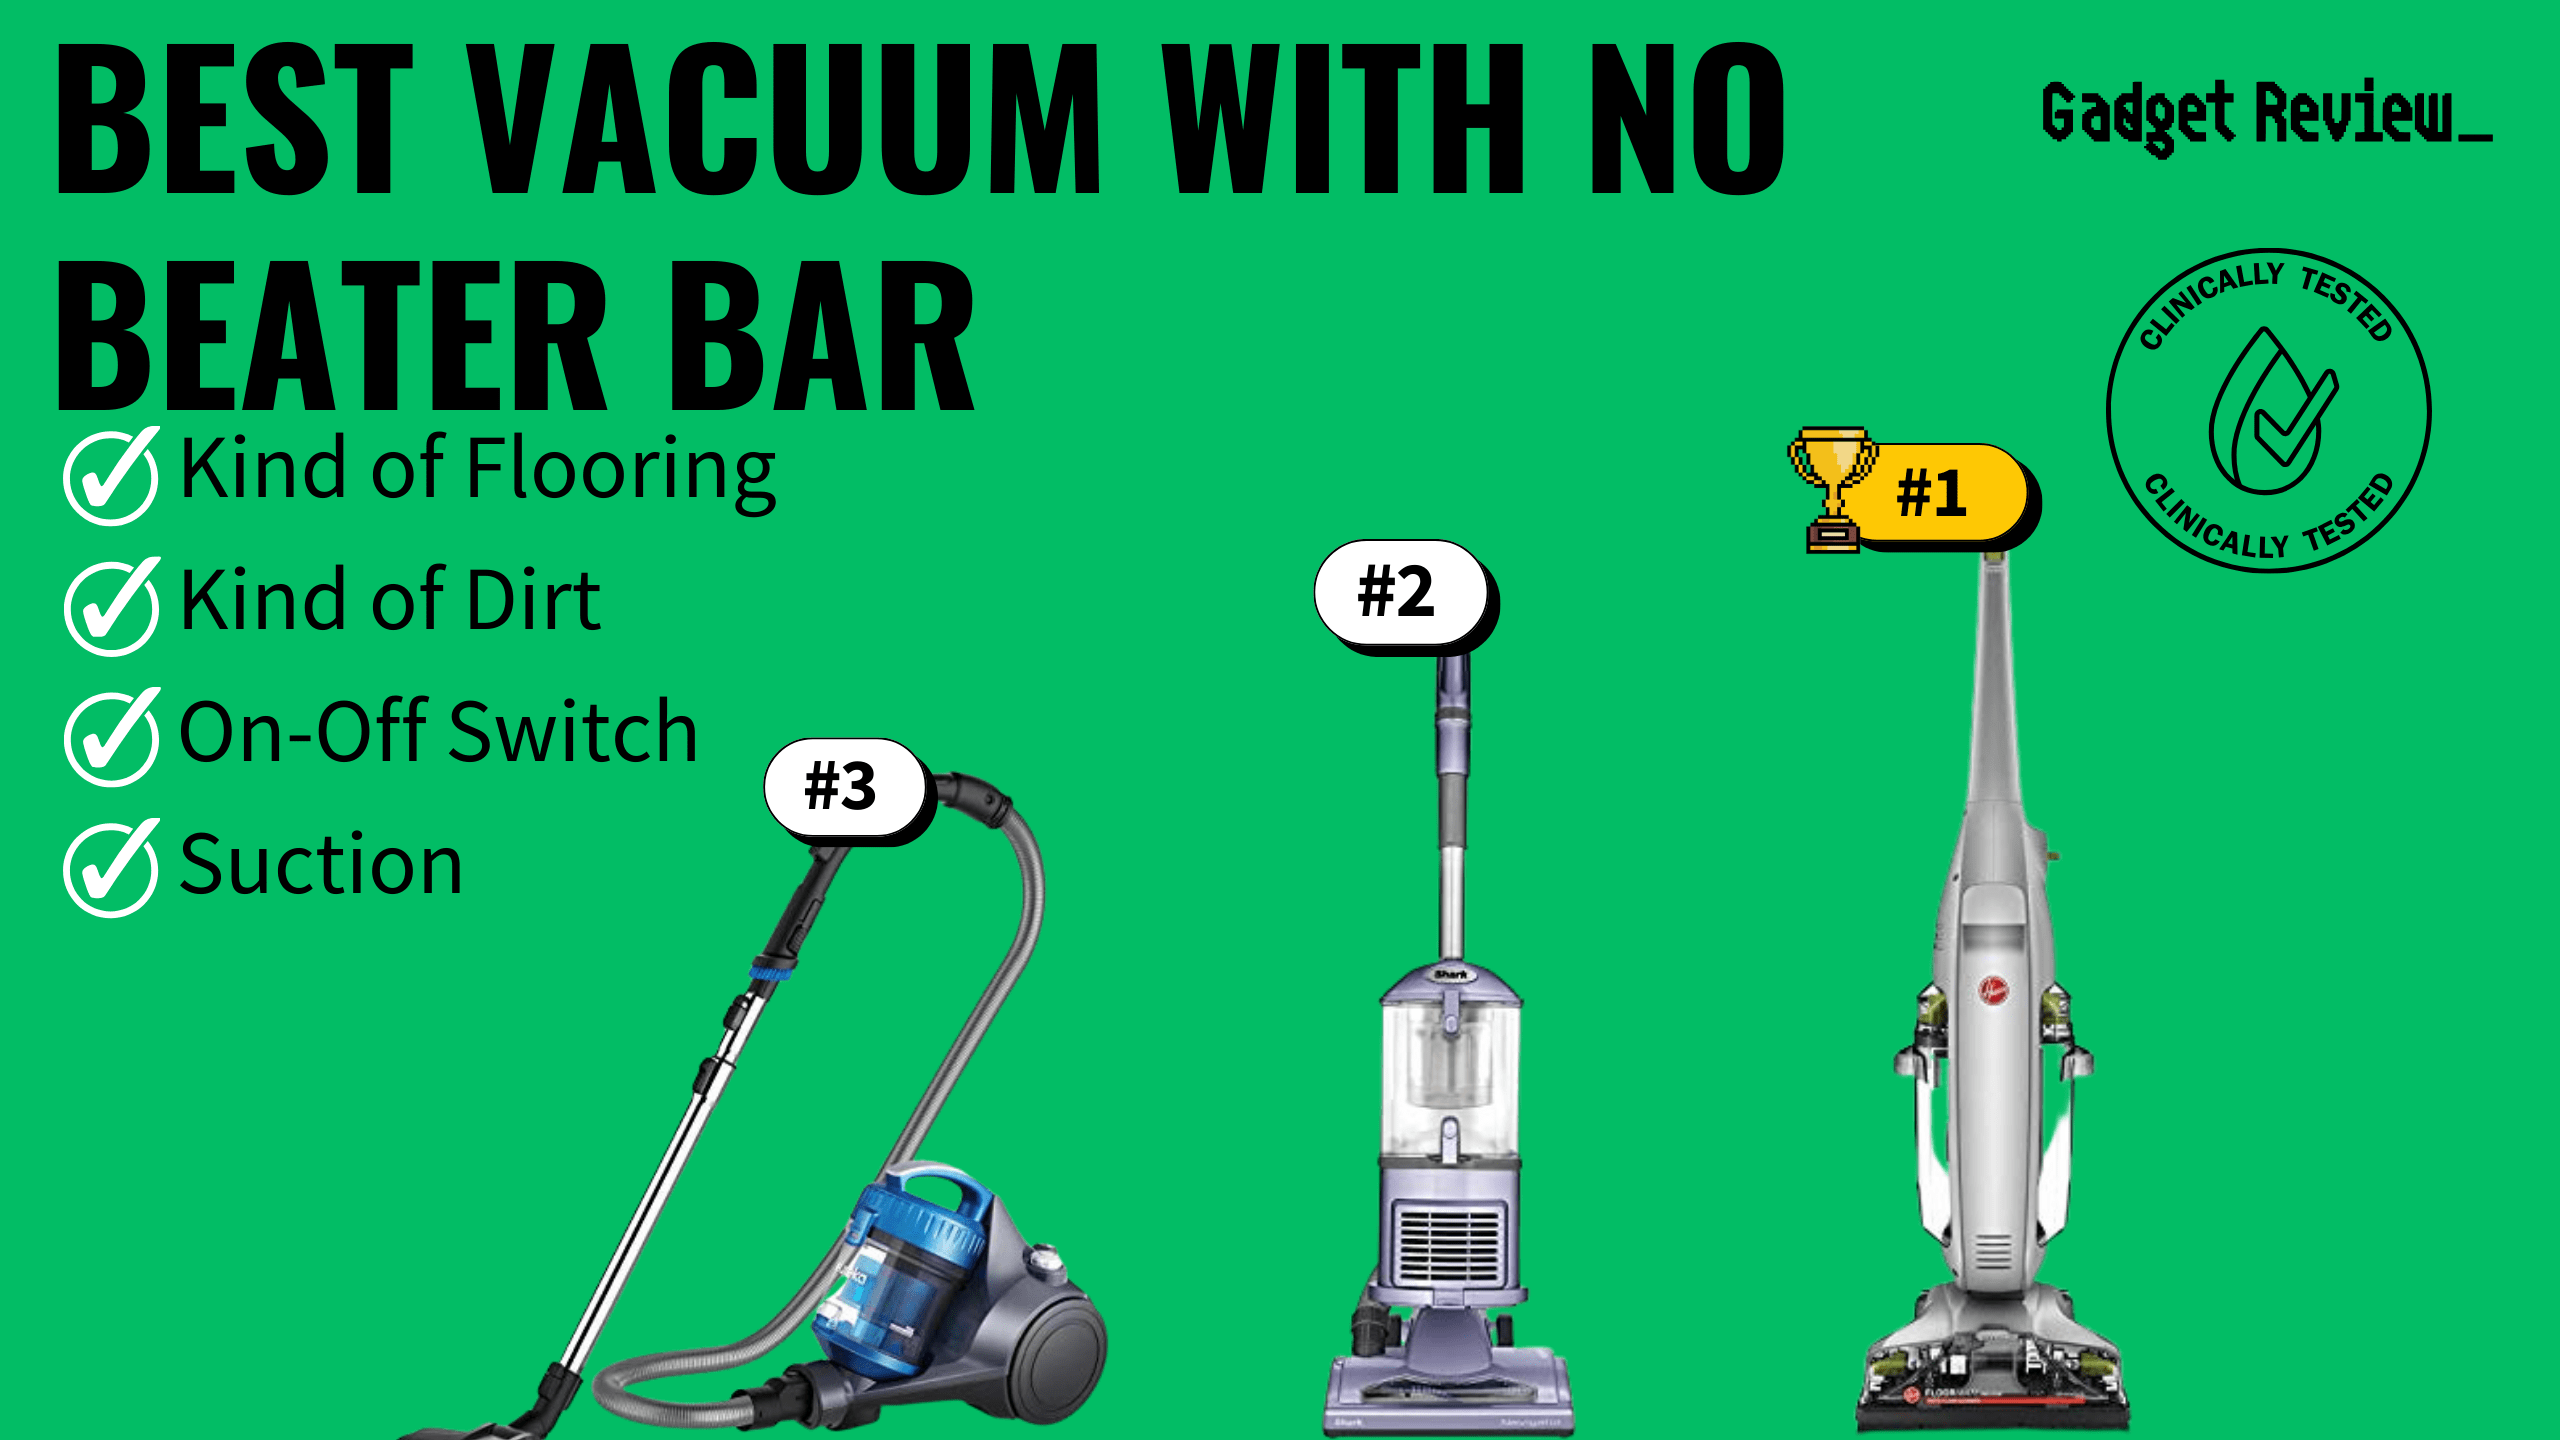 best vacuum with no beater bar featured image that shows the top three best vacuum cleaner models